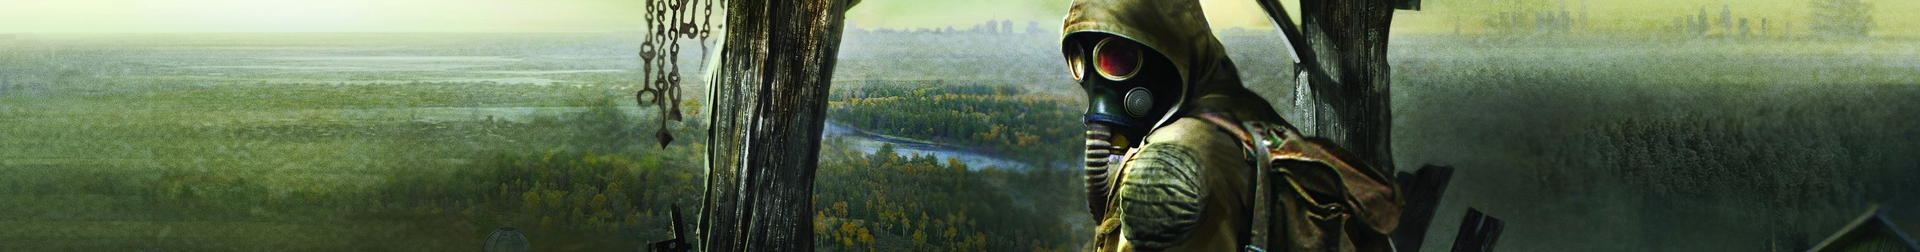 S.T.A.L.K.E.R.: Shadow of Chernobyl Banner